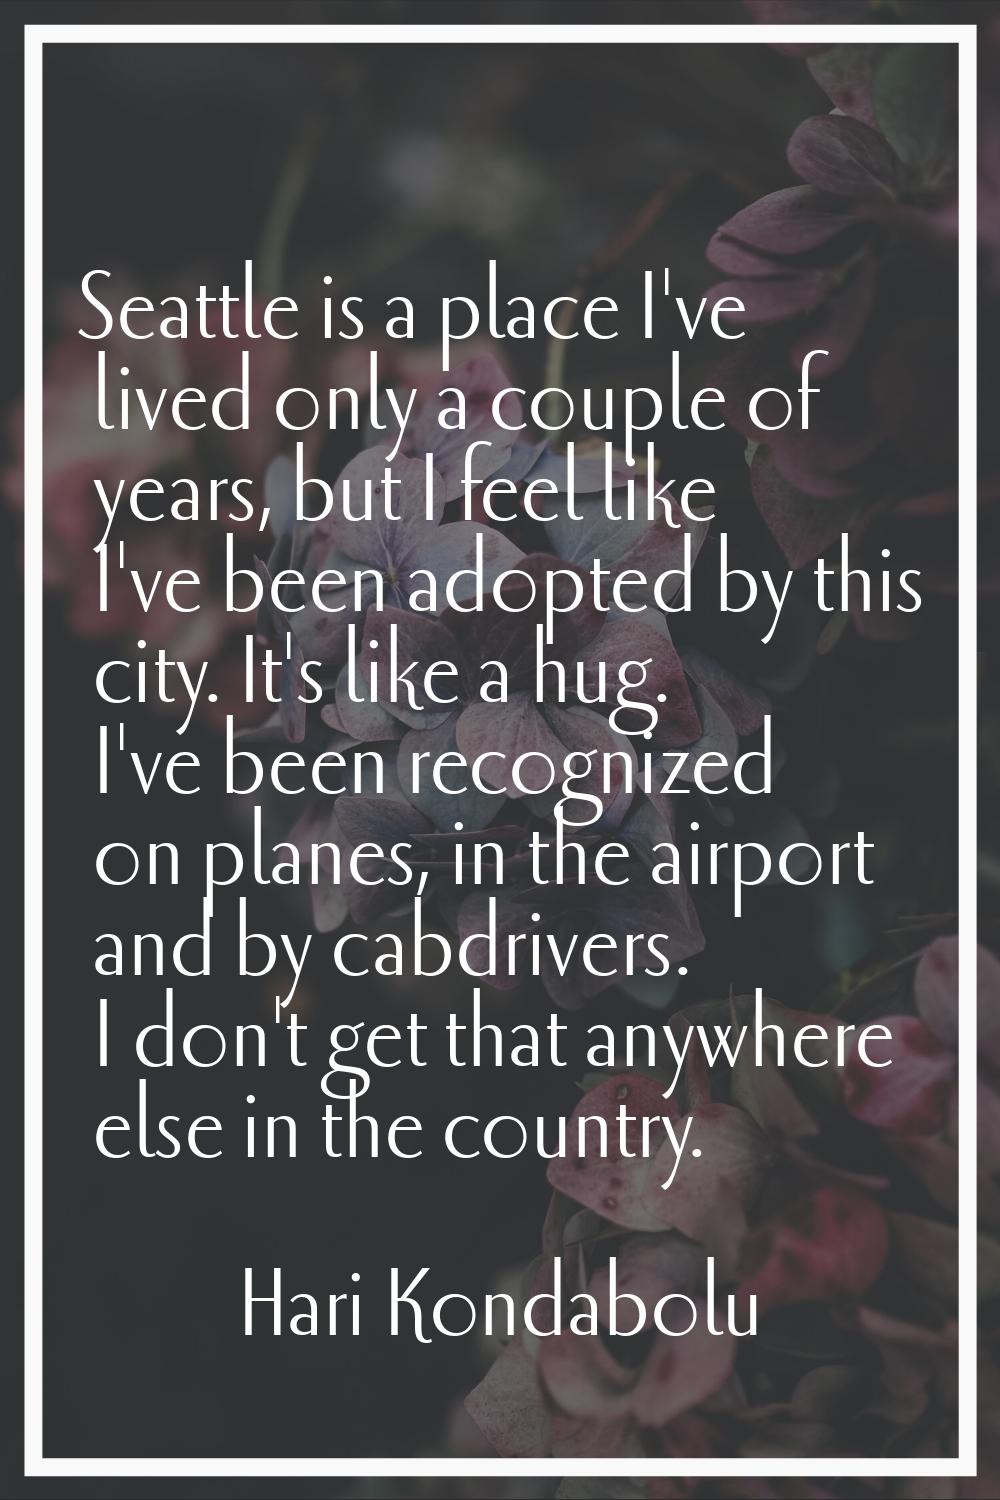 Seattle is a place I've lived only a couple of years, but I feel like I've been adopted by this cit